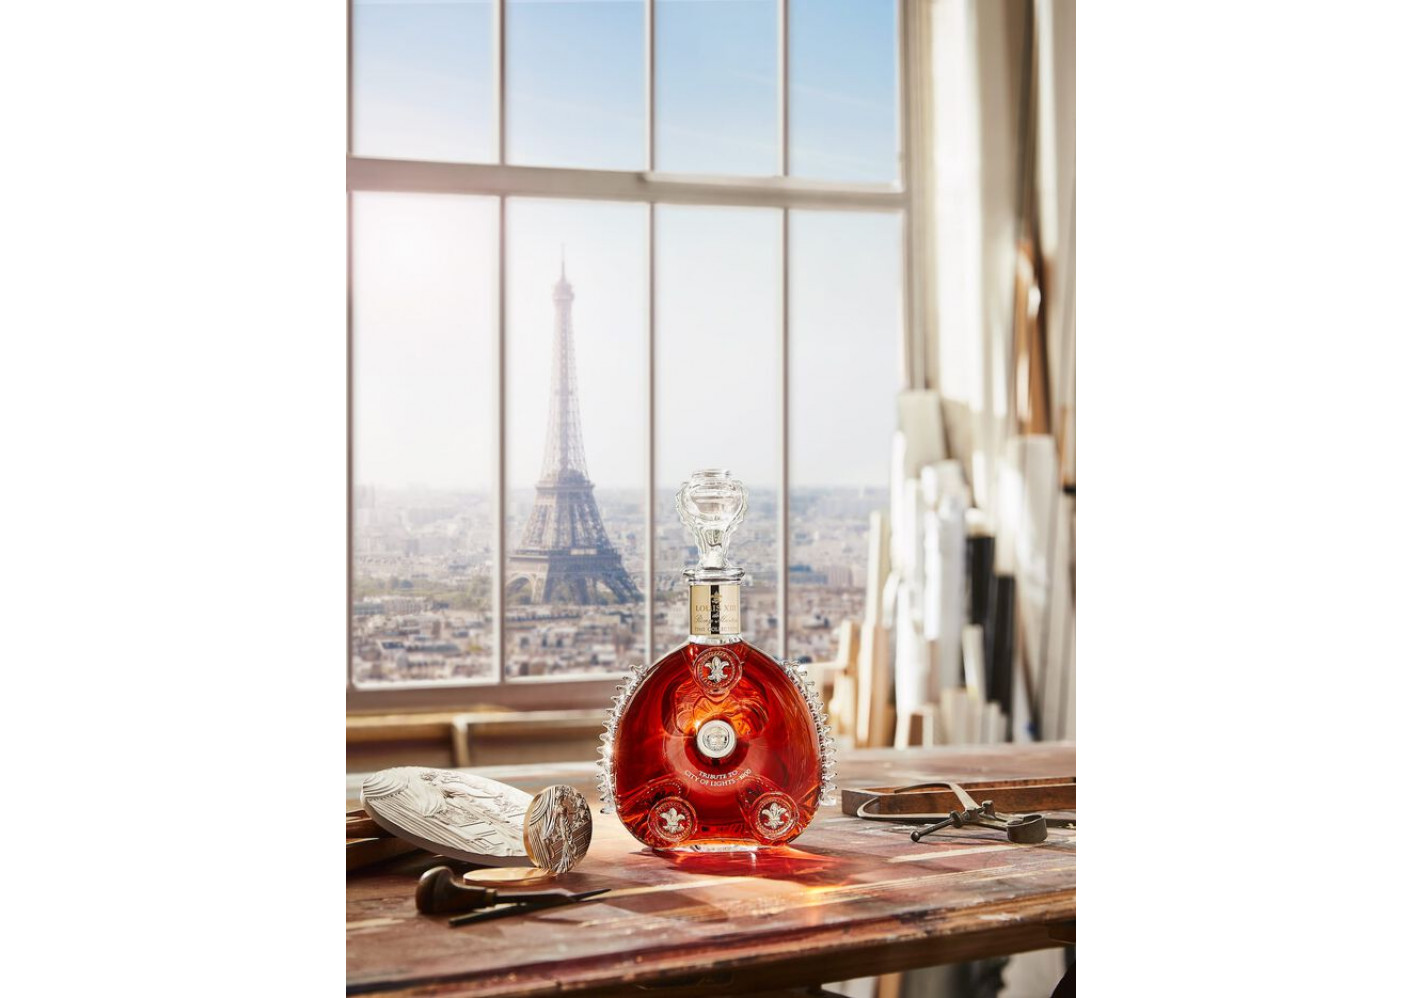 Rémy Martin Louis XIII 1874 - Time Collection First Release – Wooden Cork